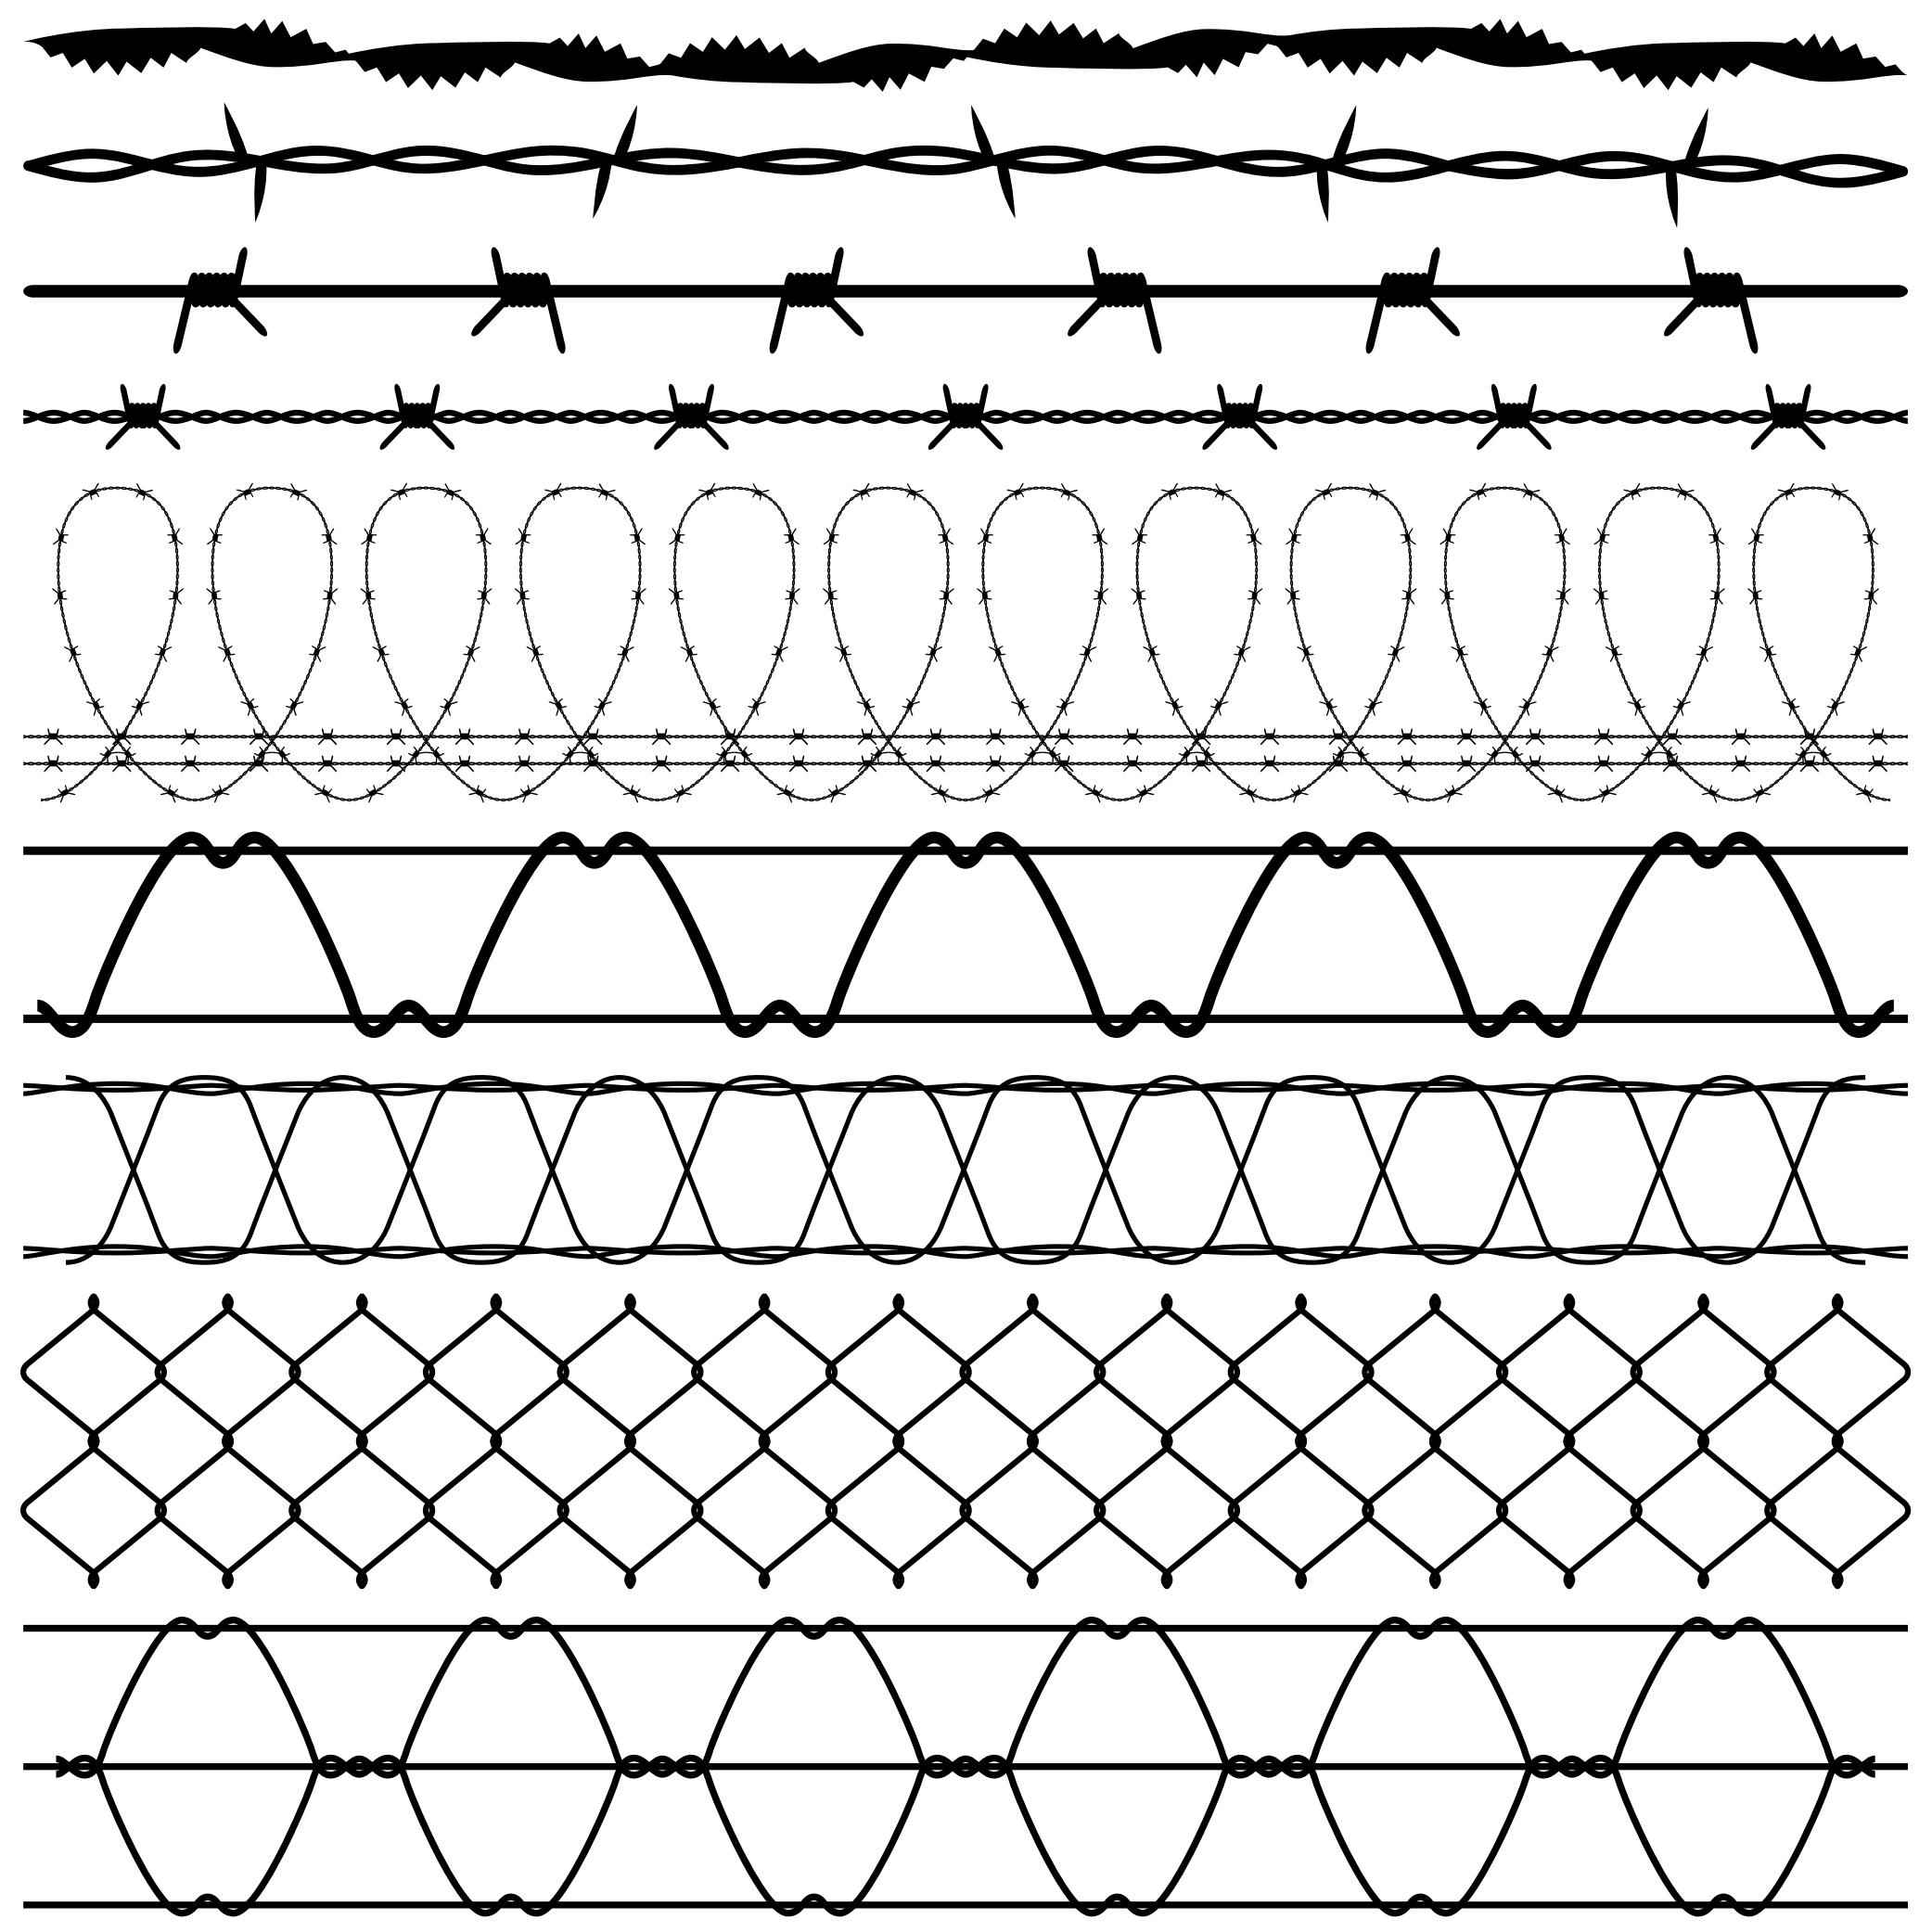 Black & White Barbed Wires png